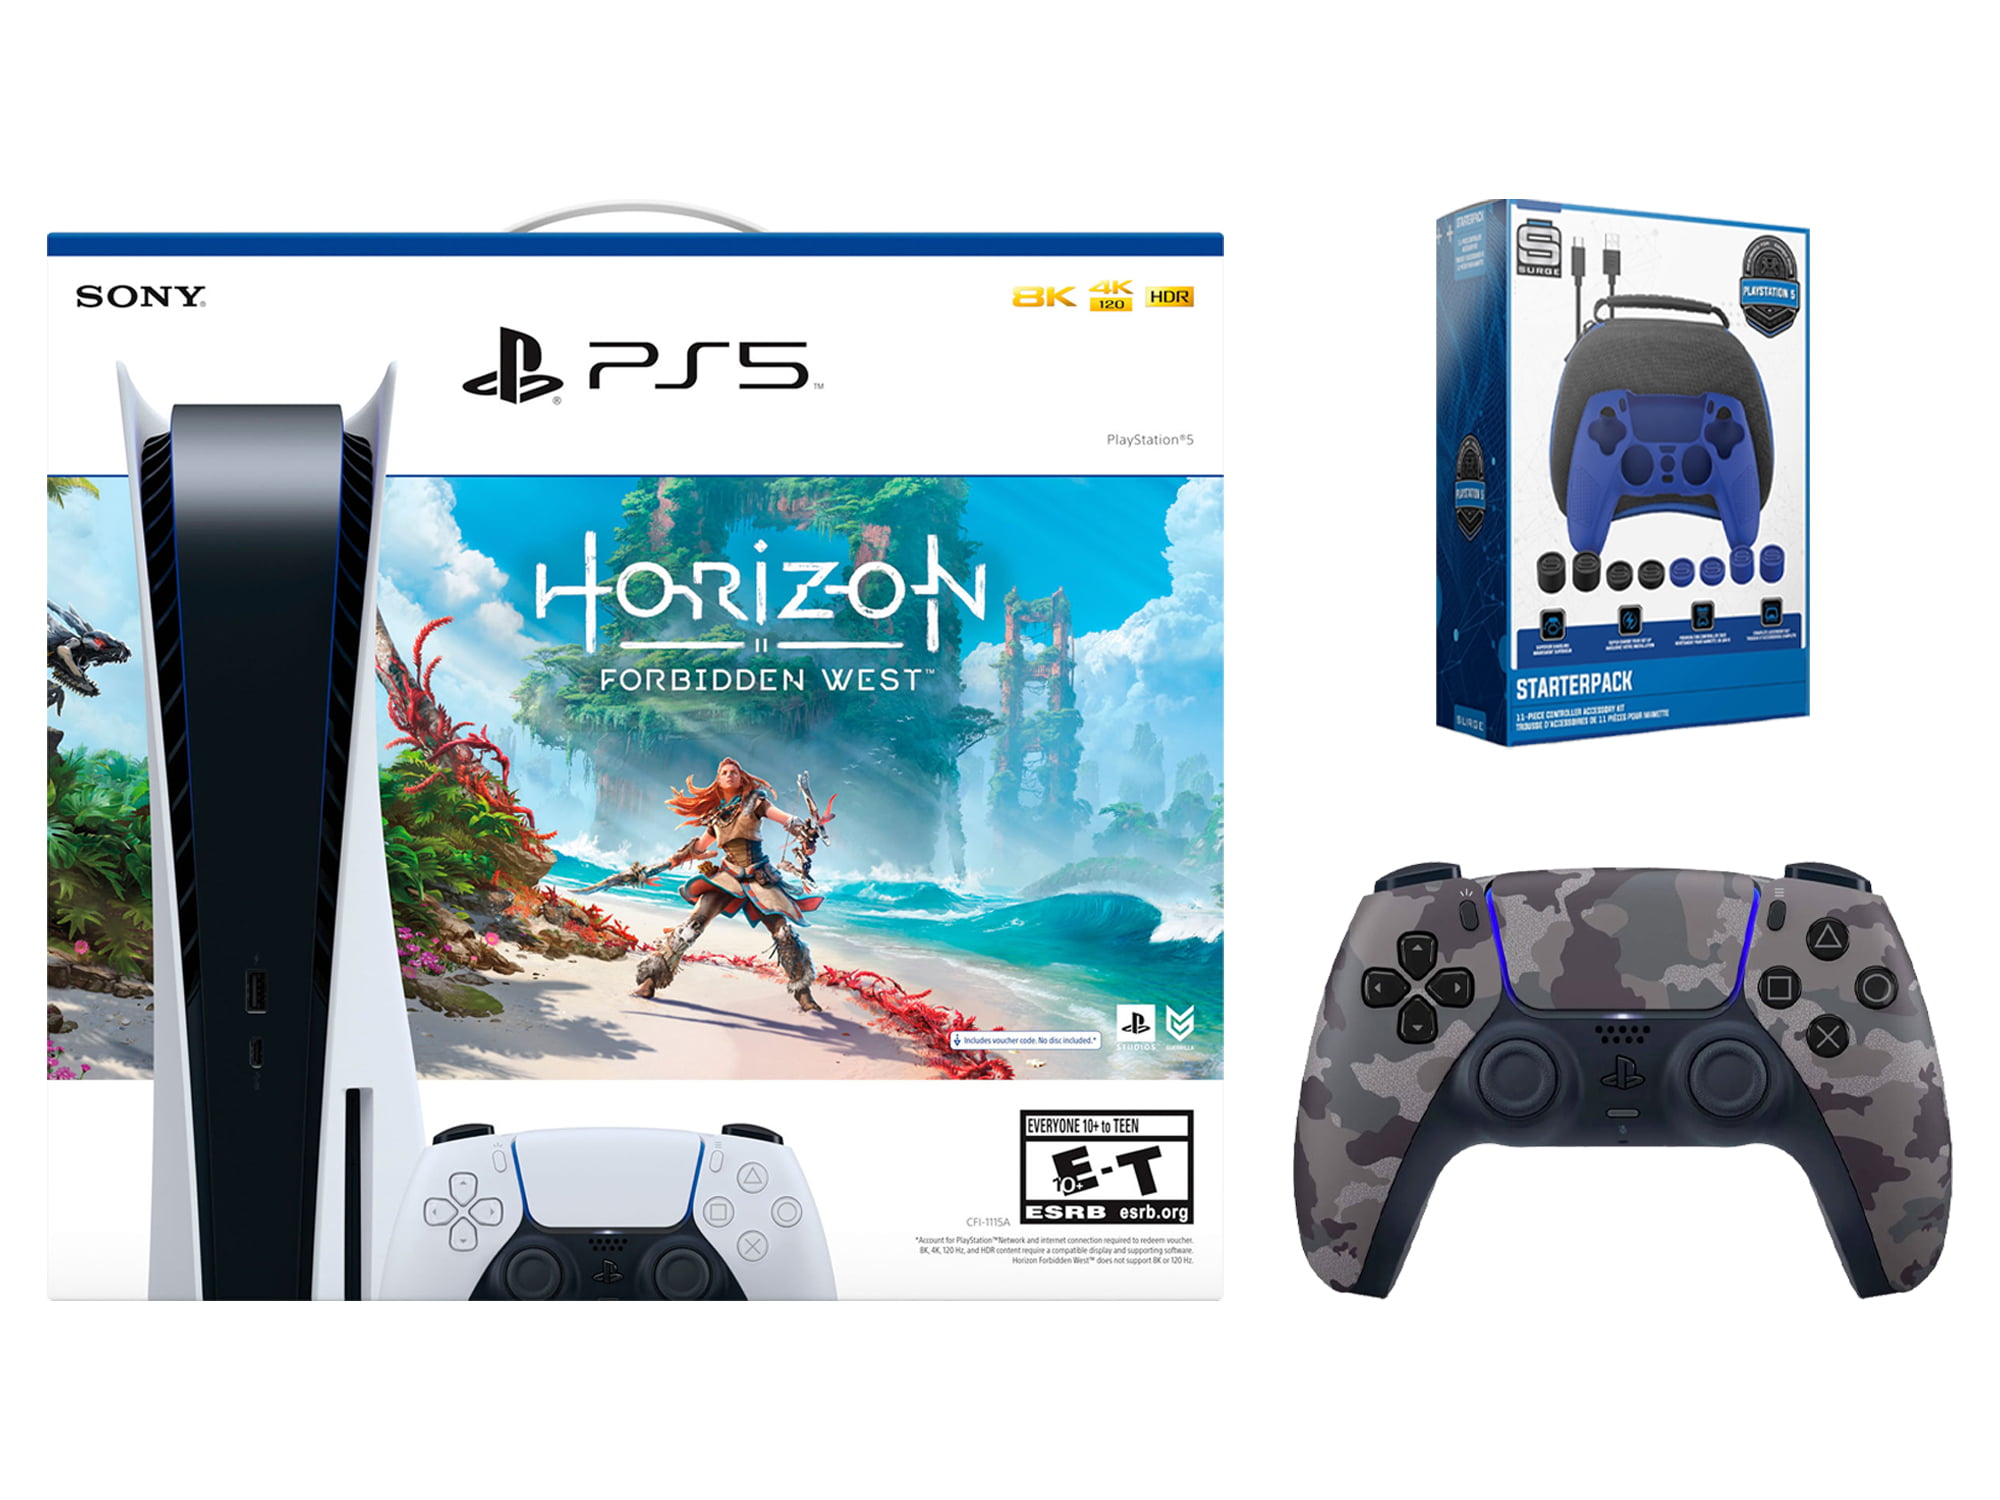 Sony Playstation Camo and Edition with Horizon Extra Disc Controller and Charge Play Bundle Gray 5 Kit West Forbidden